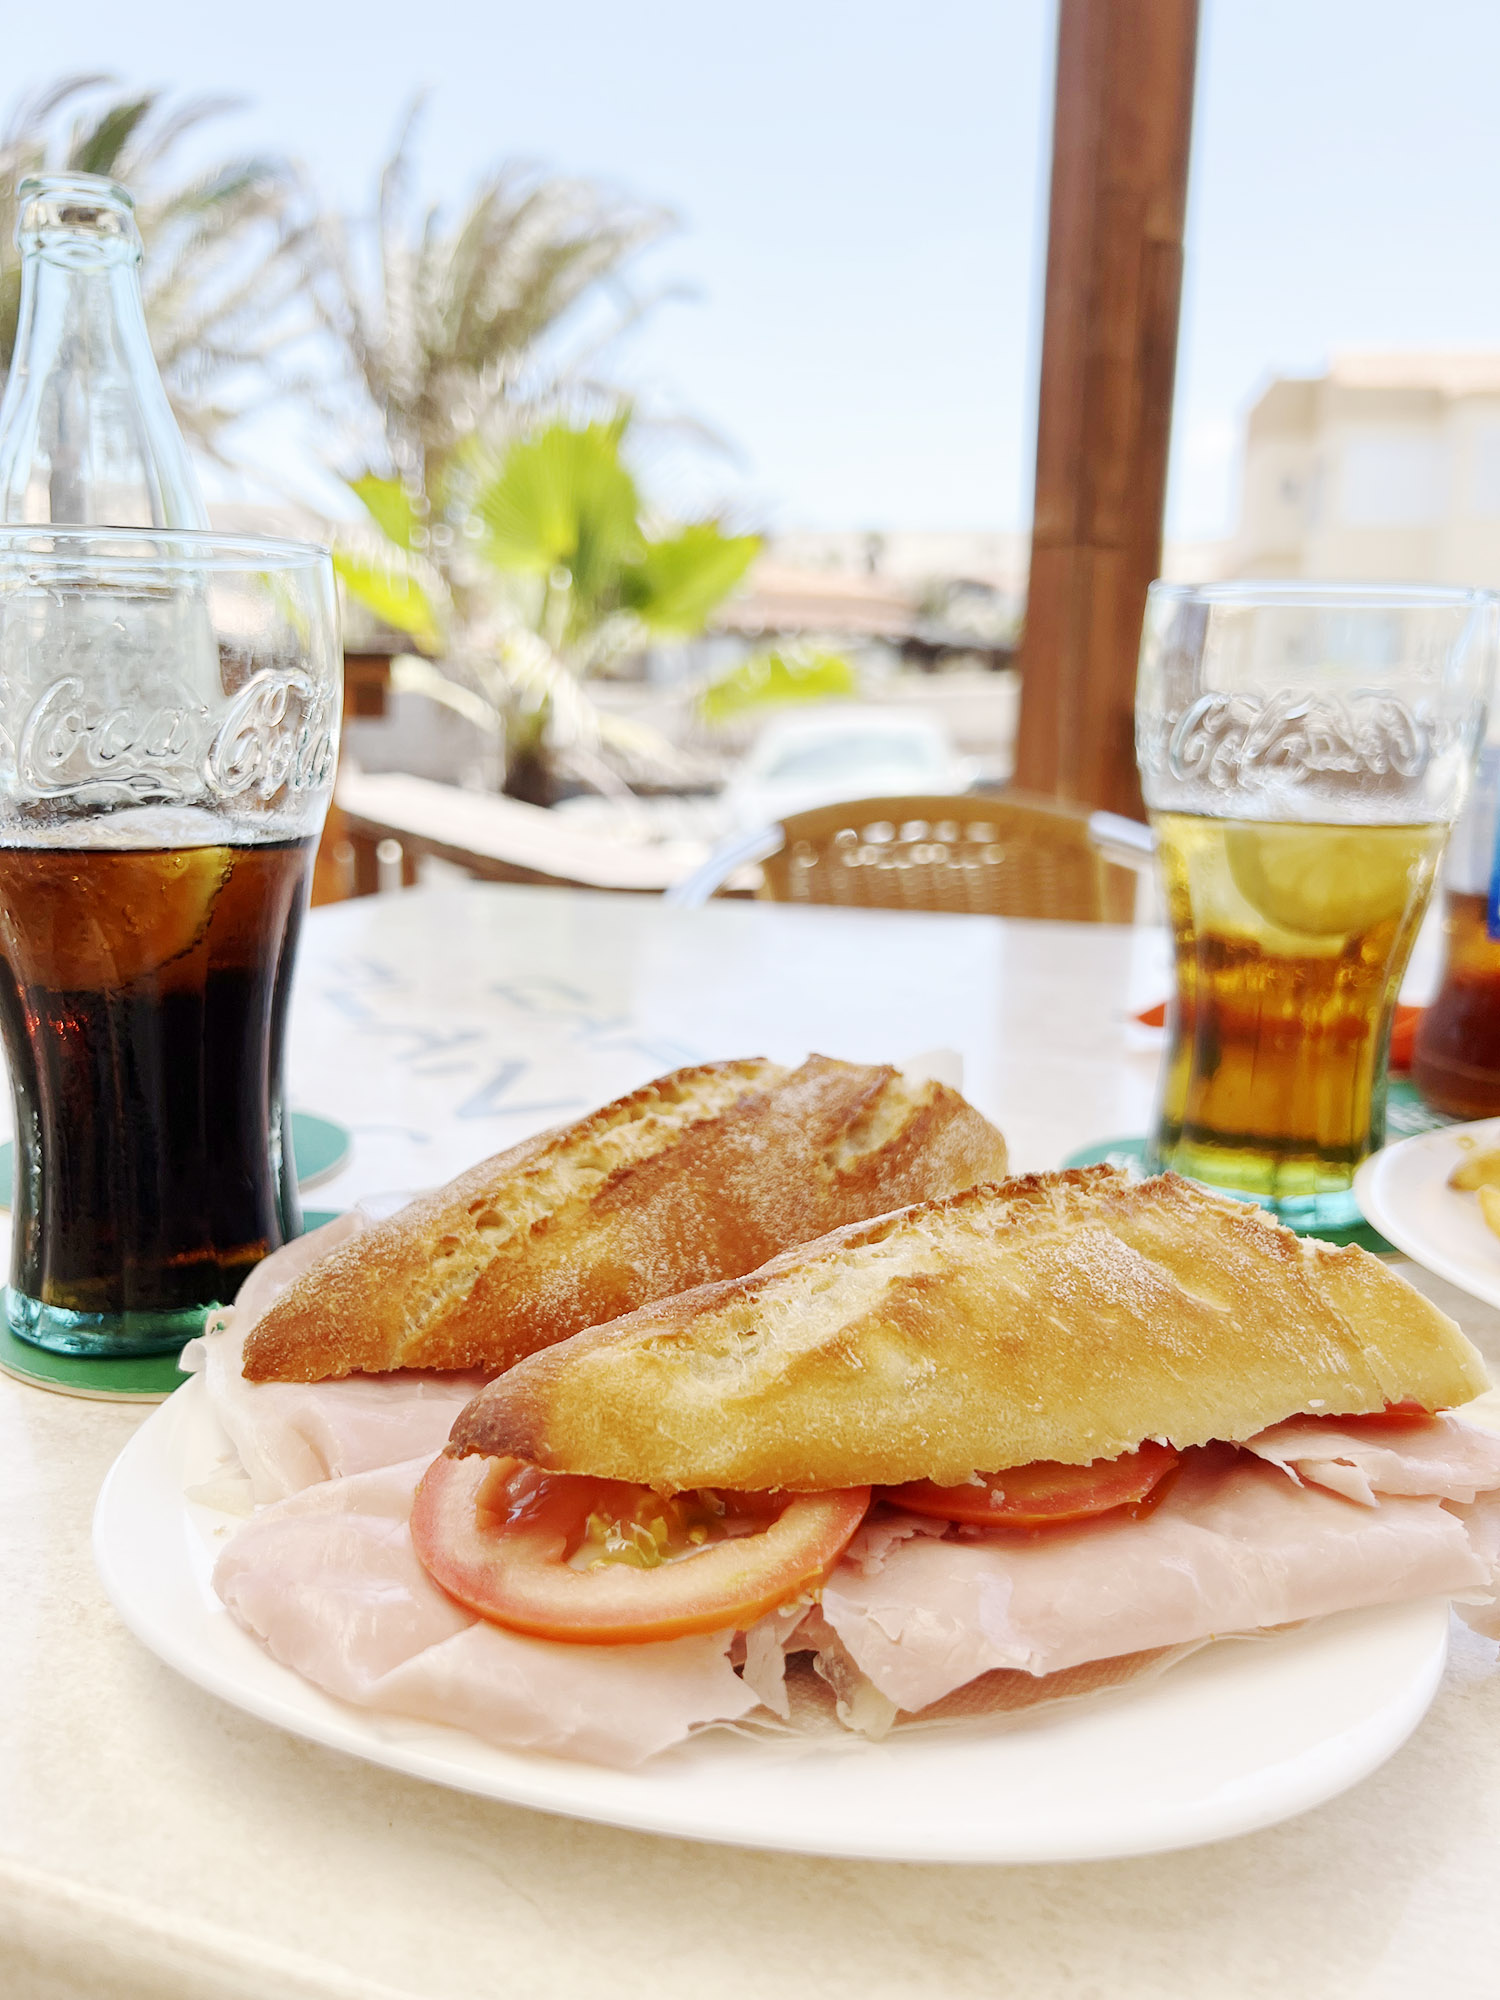 Fuerteventura: Plan B - A nice place for lunch in La Pared